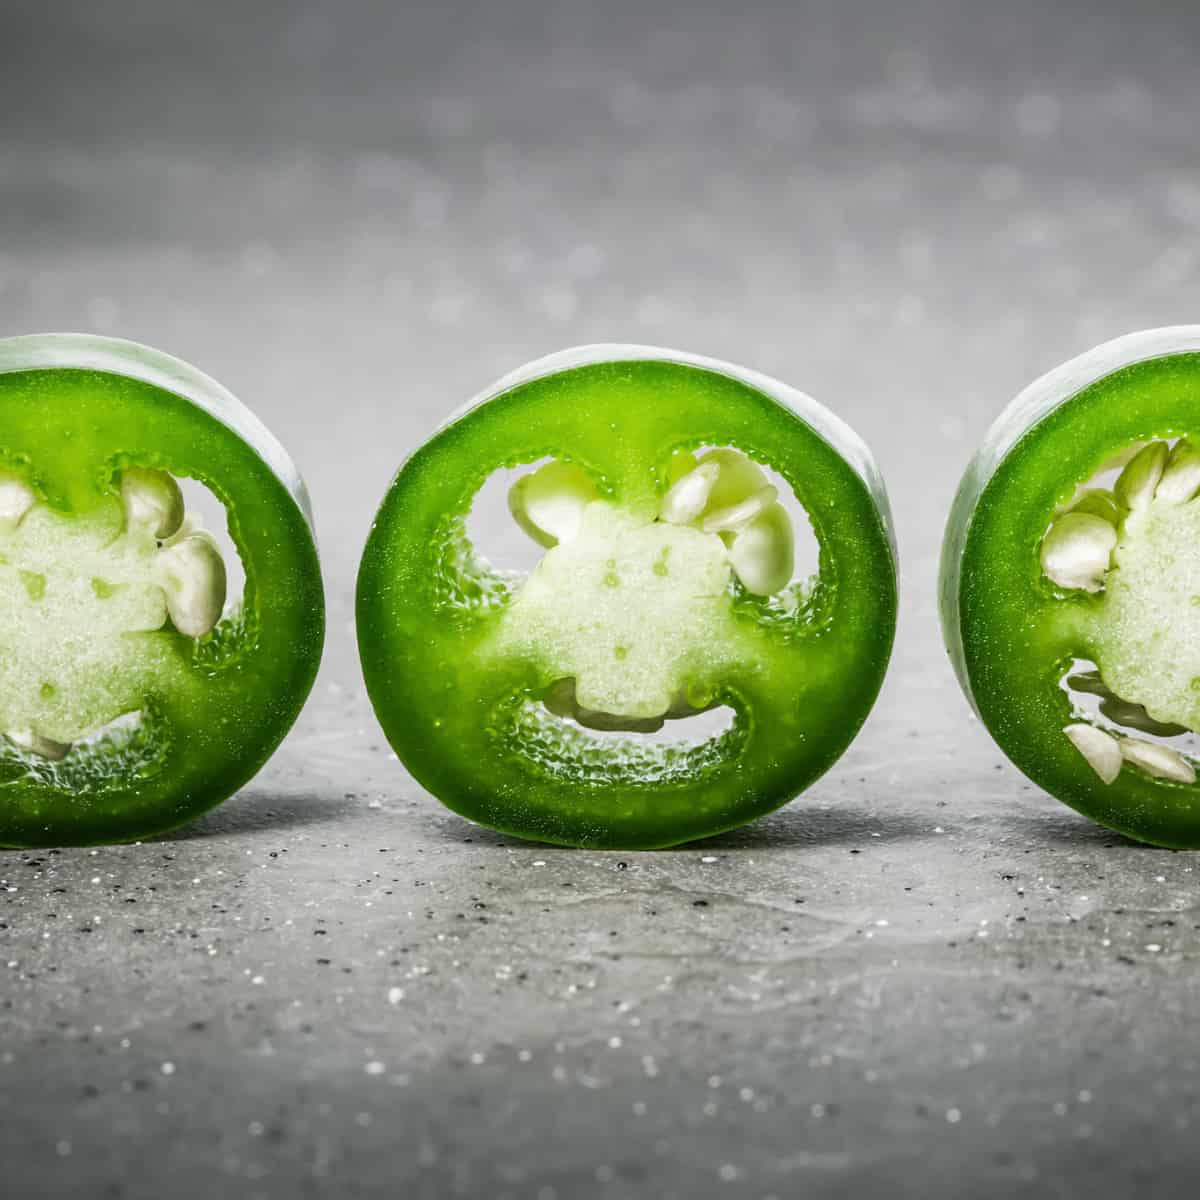 cross section view of a 3 slices of jalapenos